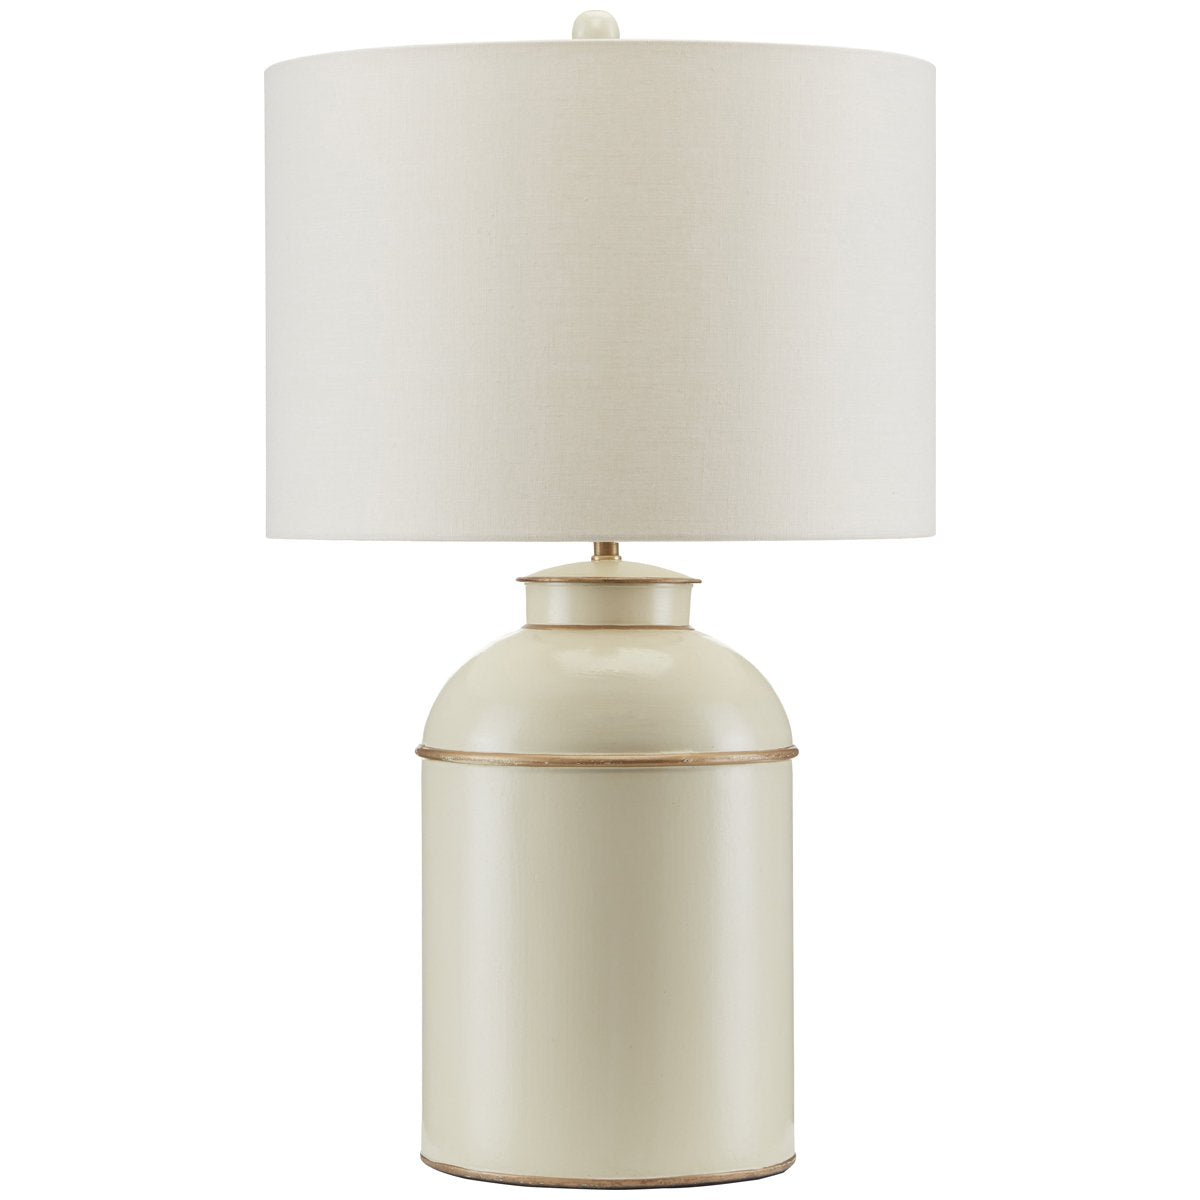 Currey and Company London Table Lamp